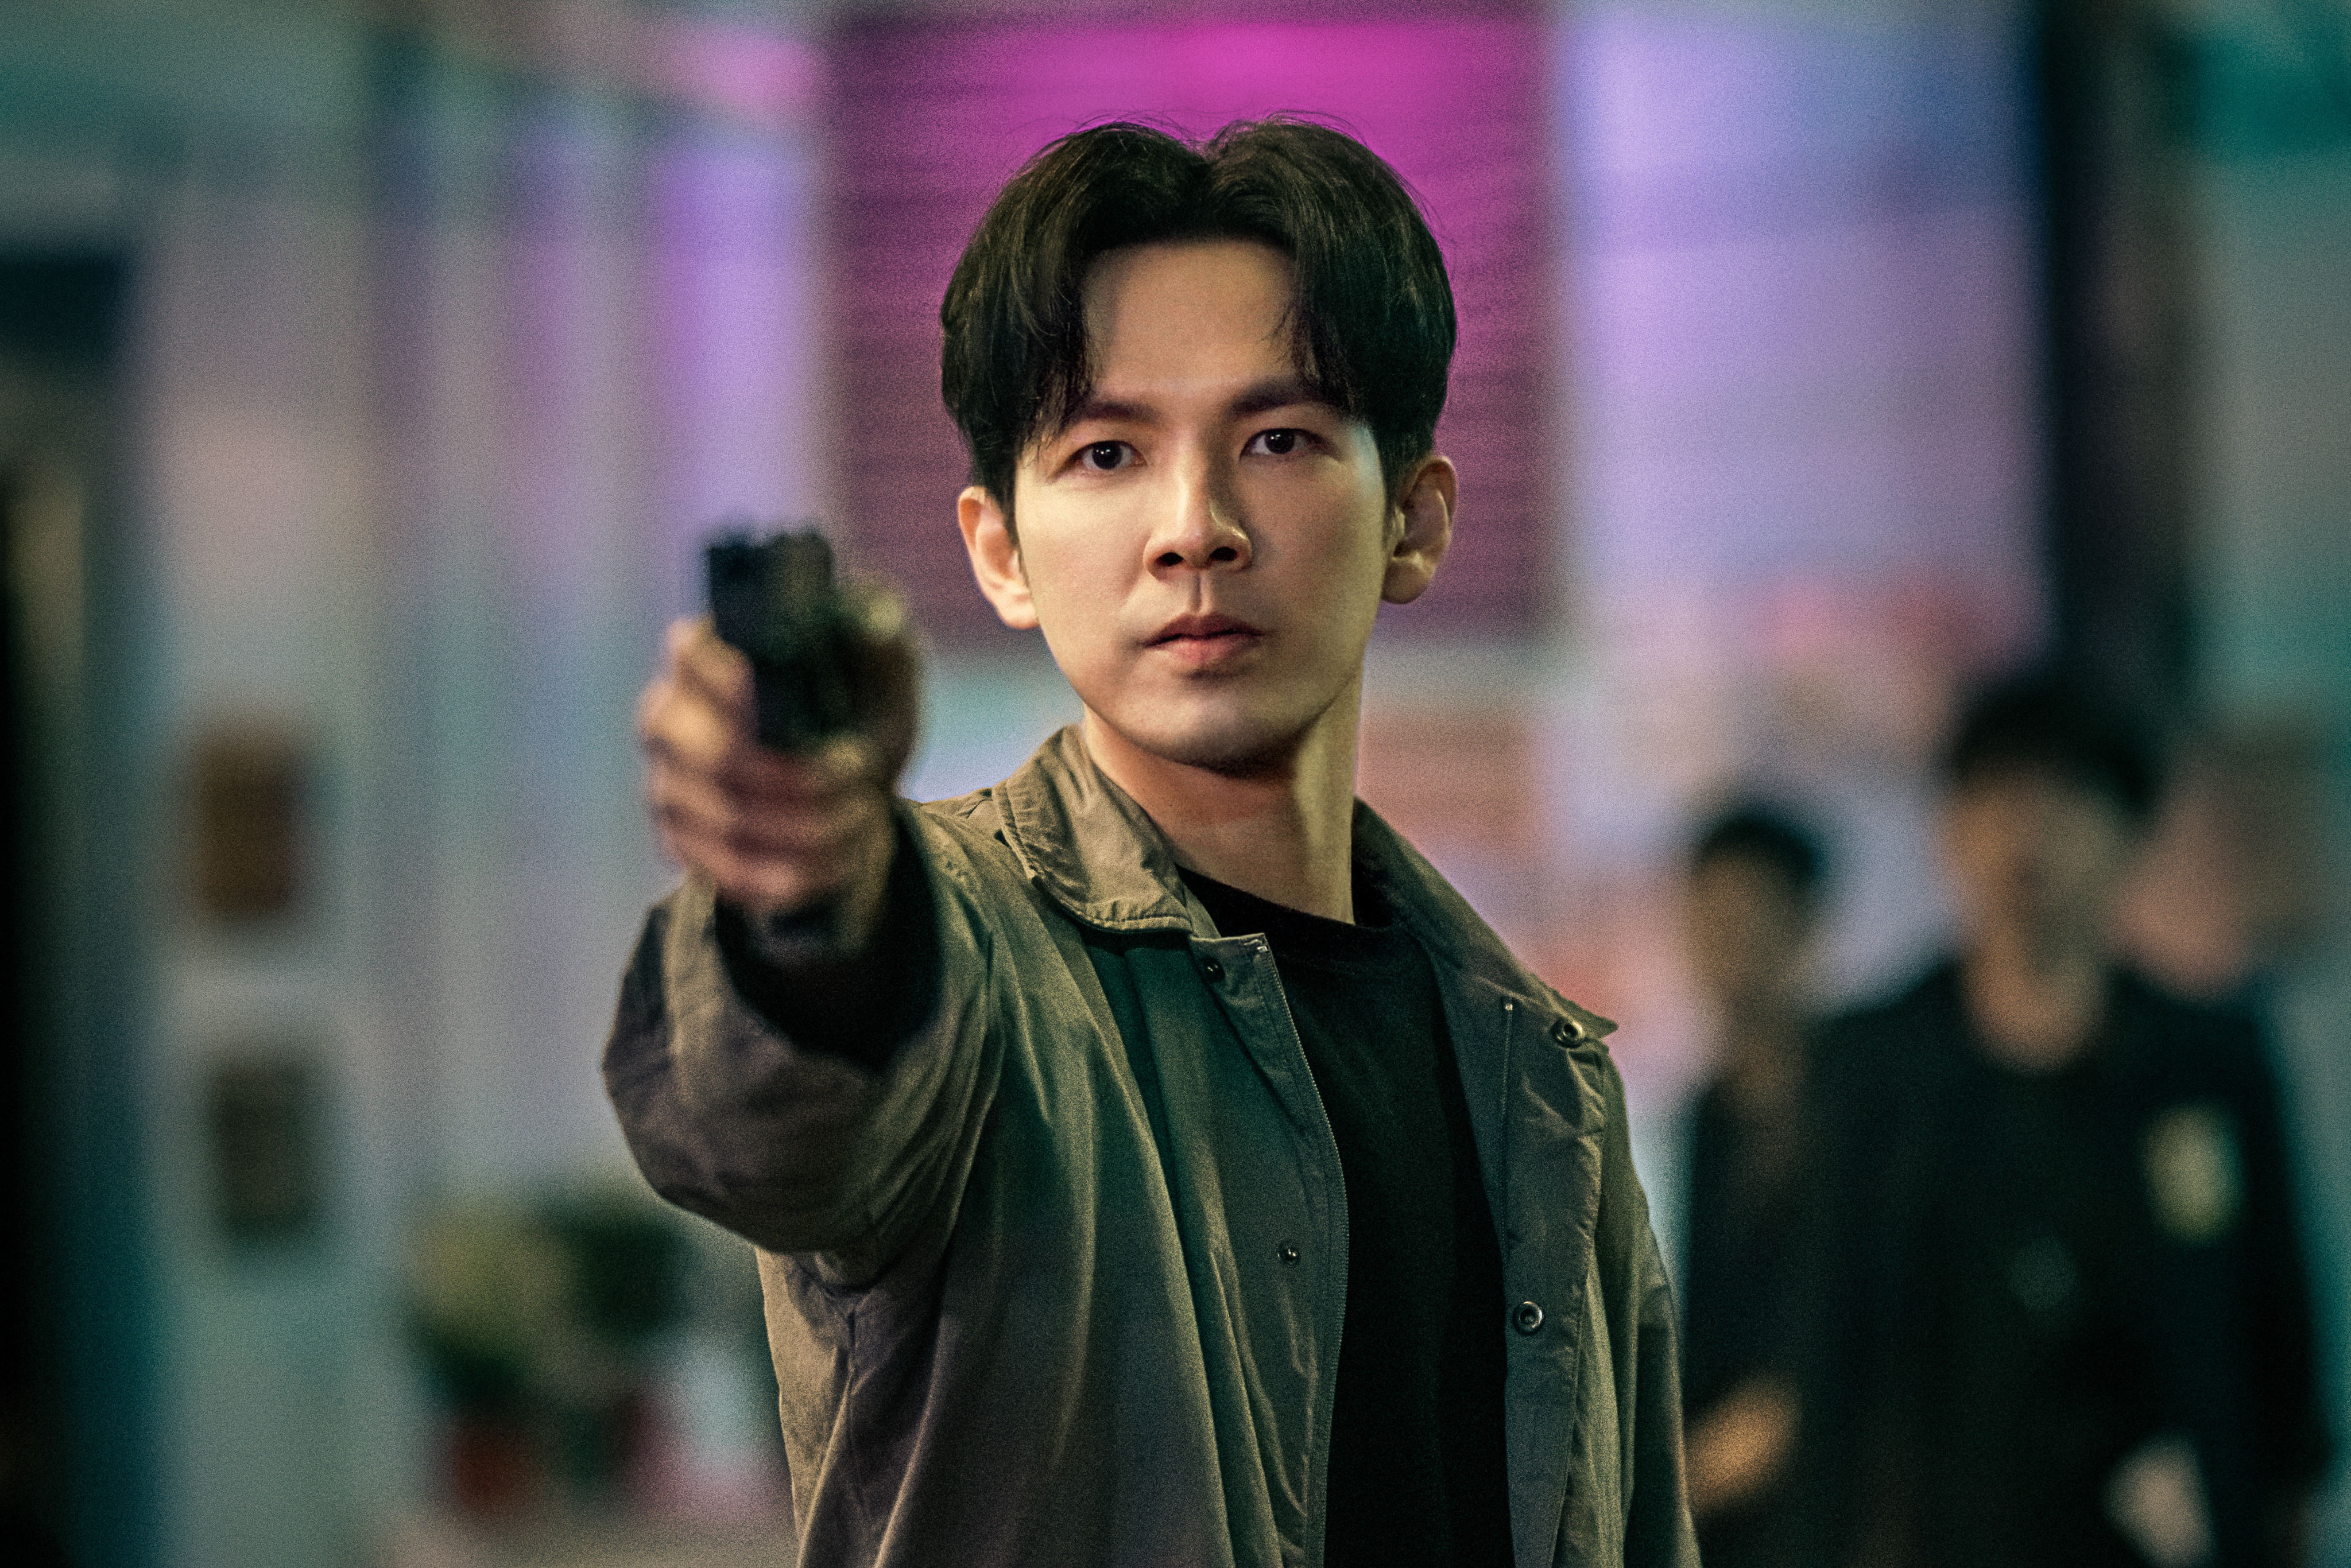 Wallace Chung in a still from “Death Stranding”.